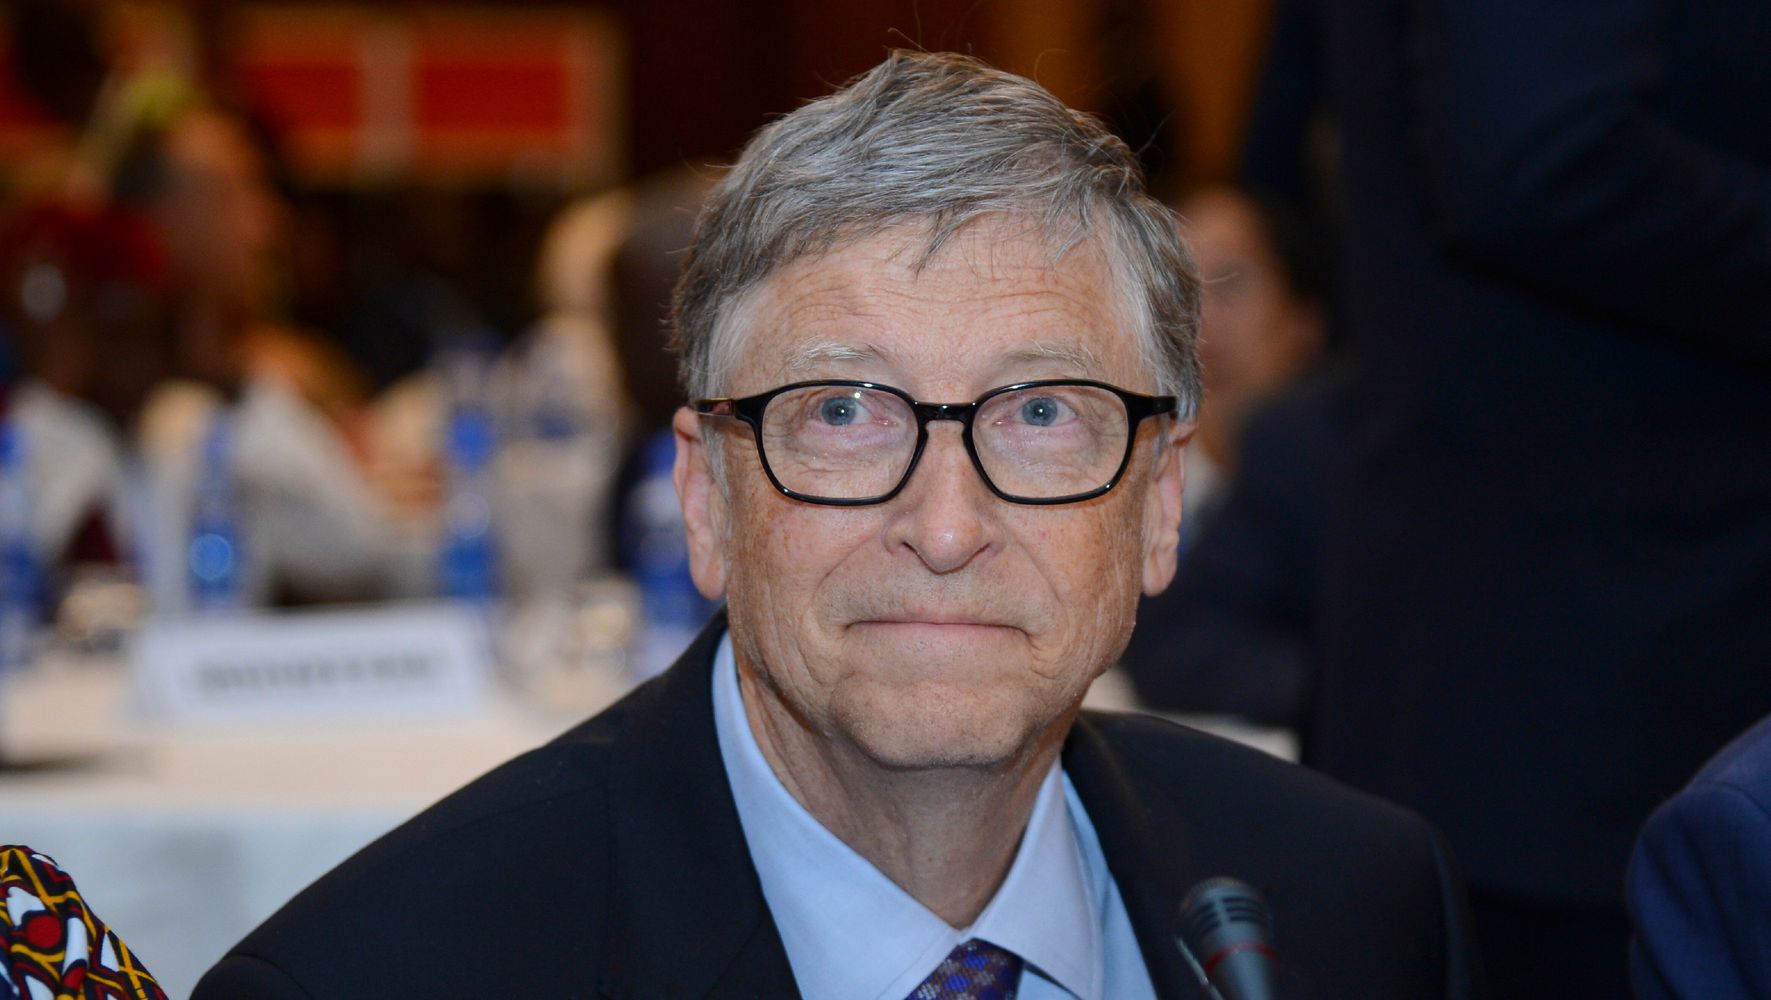 Microsoft Says It Warned Bill Gates About Workplace Flirting In 2008 | HuffPost Impact